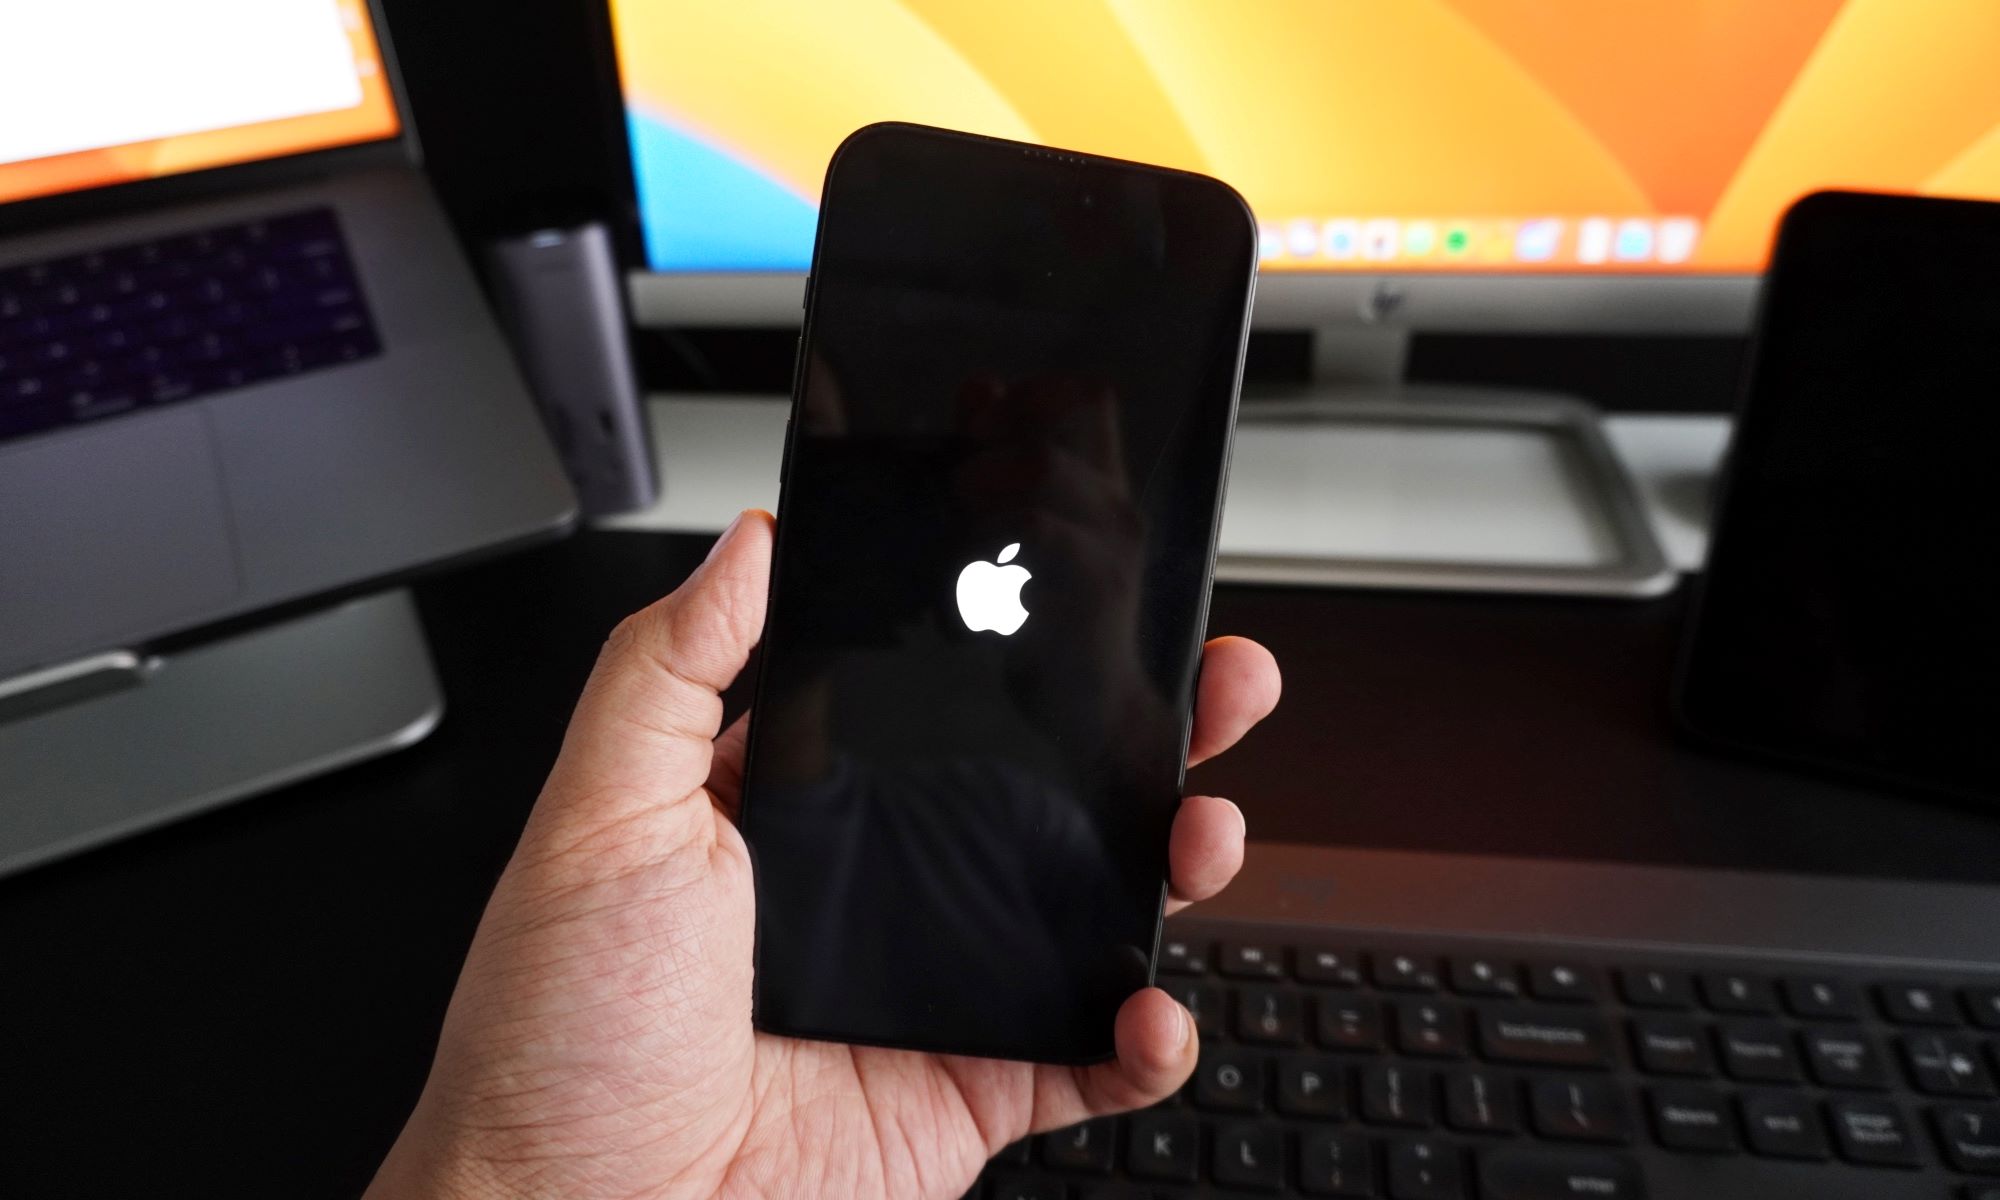 How To Transfer Photos From iPhone To PC Windows 10